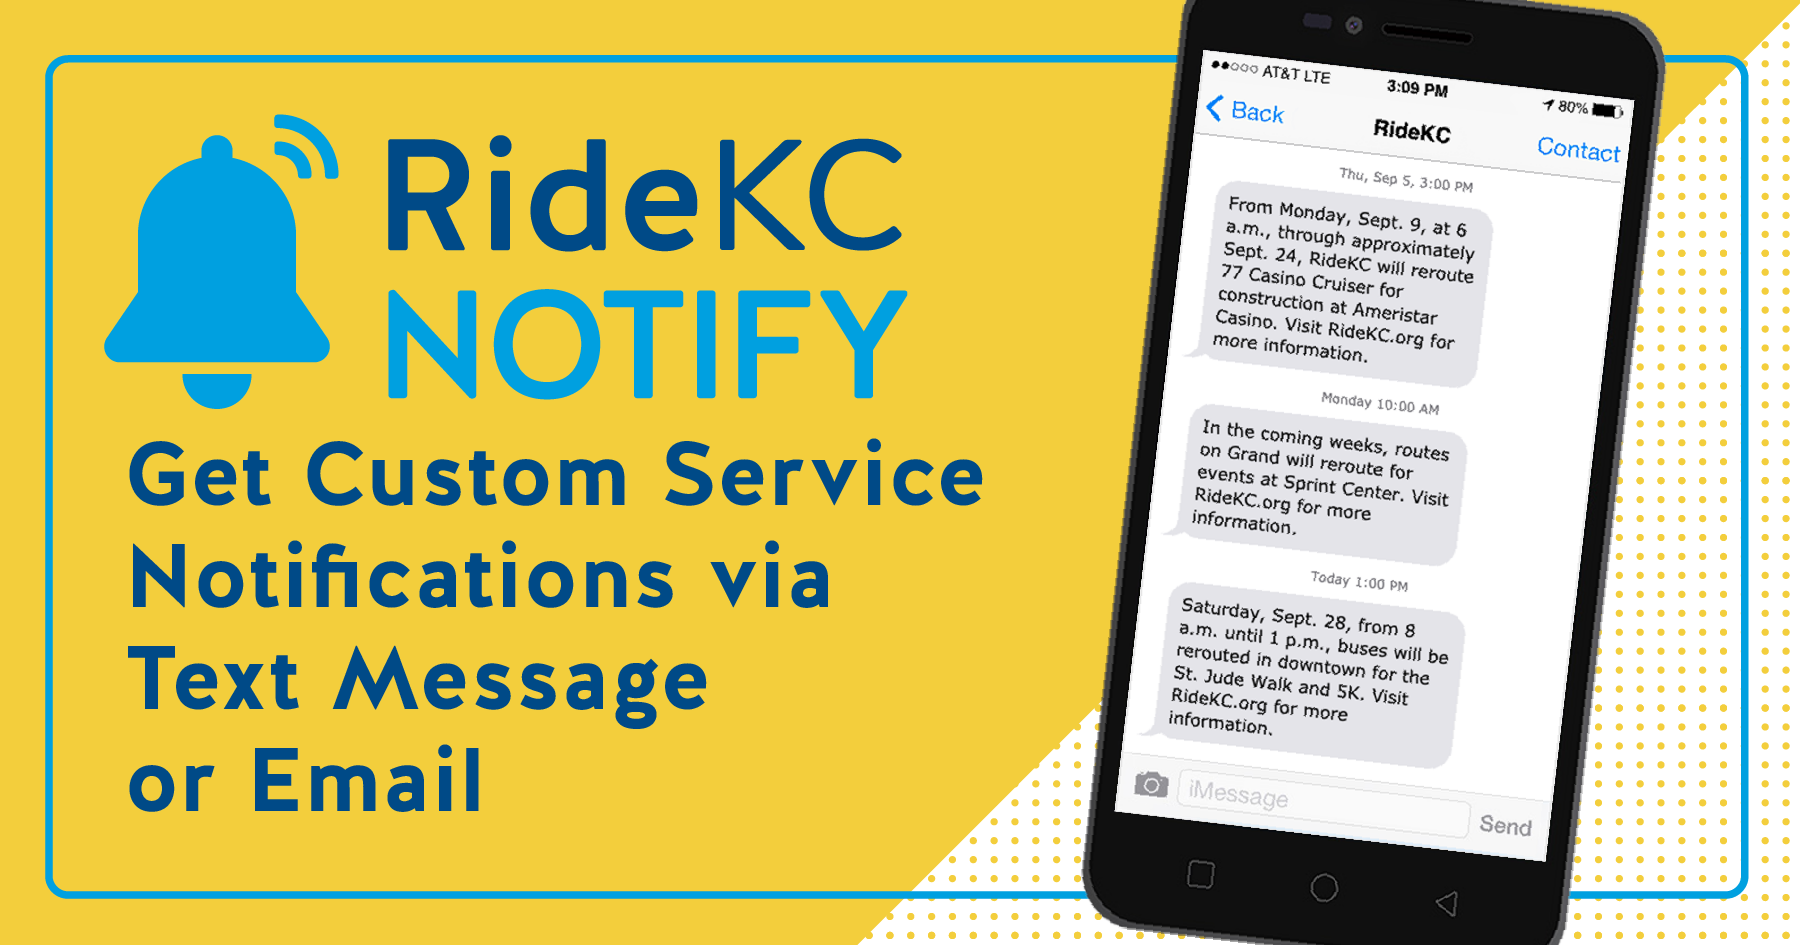 RideKC Notify image with cellphone: Get customer service notifications via text message or email.